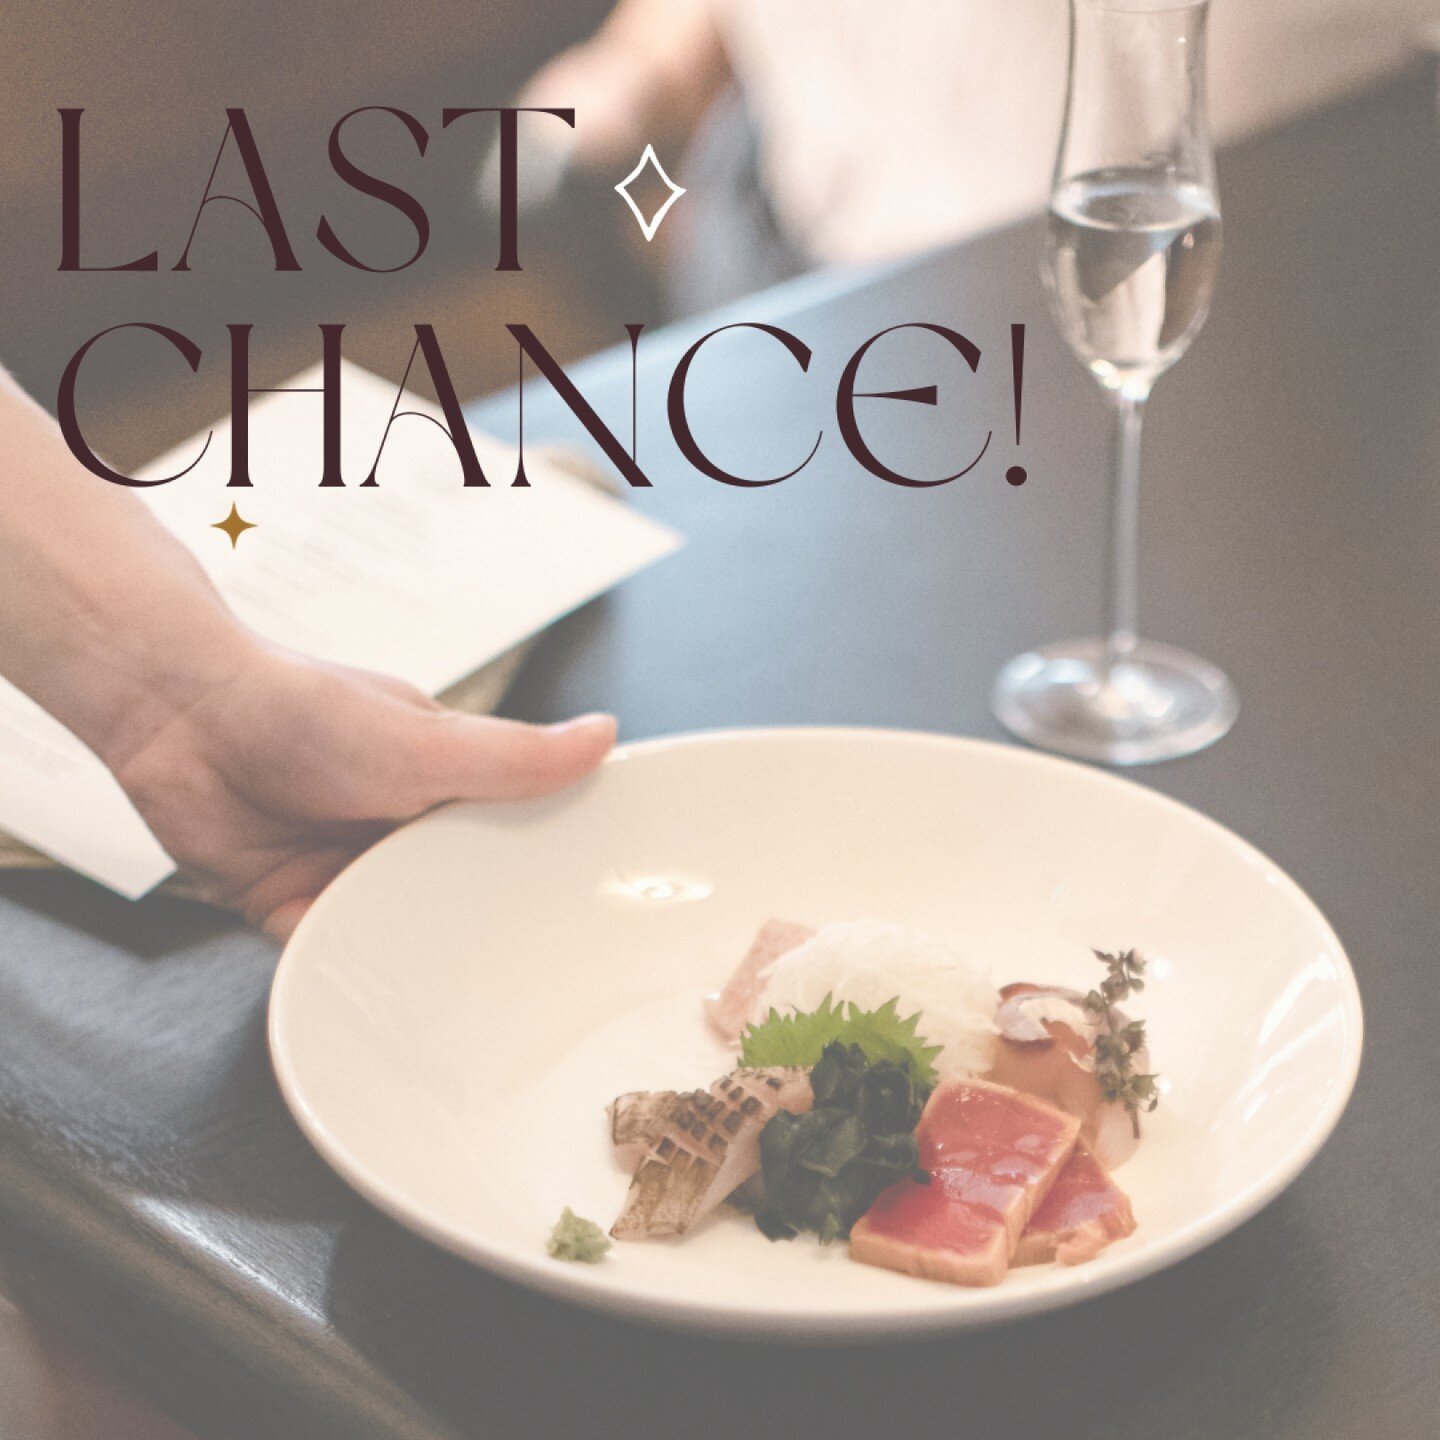 Last chance to reserve your spot for Boise's Premier Sushi Experience, tomorrow, 10/17
.
Drawing on his deep experience in Japanese cuisine, Chef Edward presents a six-course sushi dinner, complete with curated sake pairings. 
.
Click on the link in 